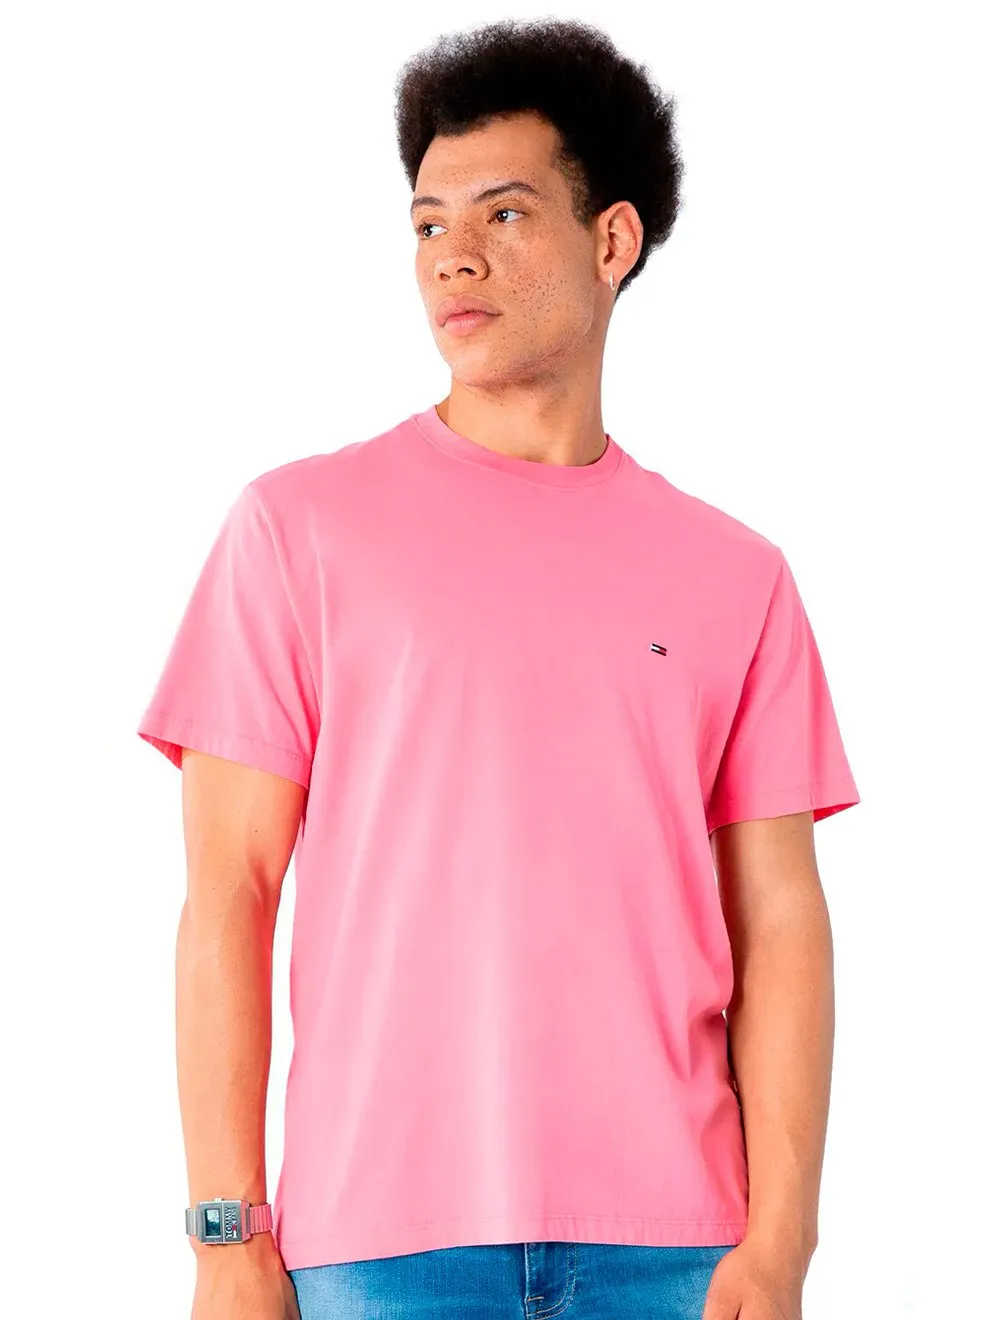 Camiseta Tommy Jeans Masculina Classic Jersey C-Neck Flag Rosa